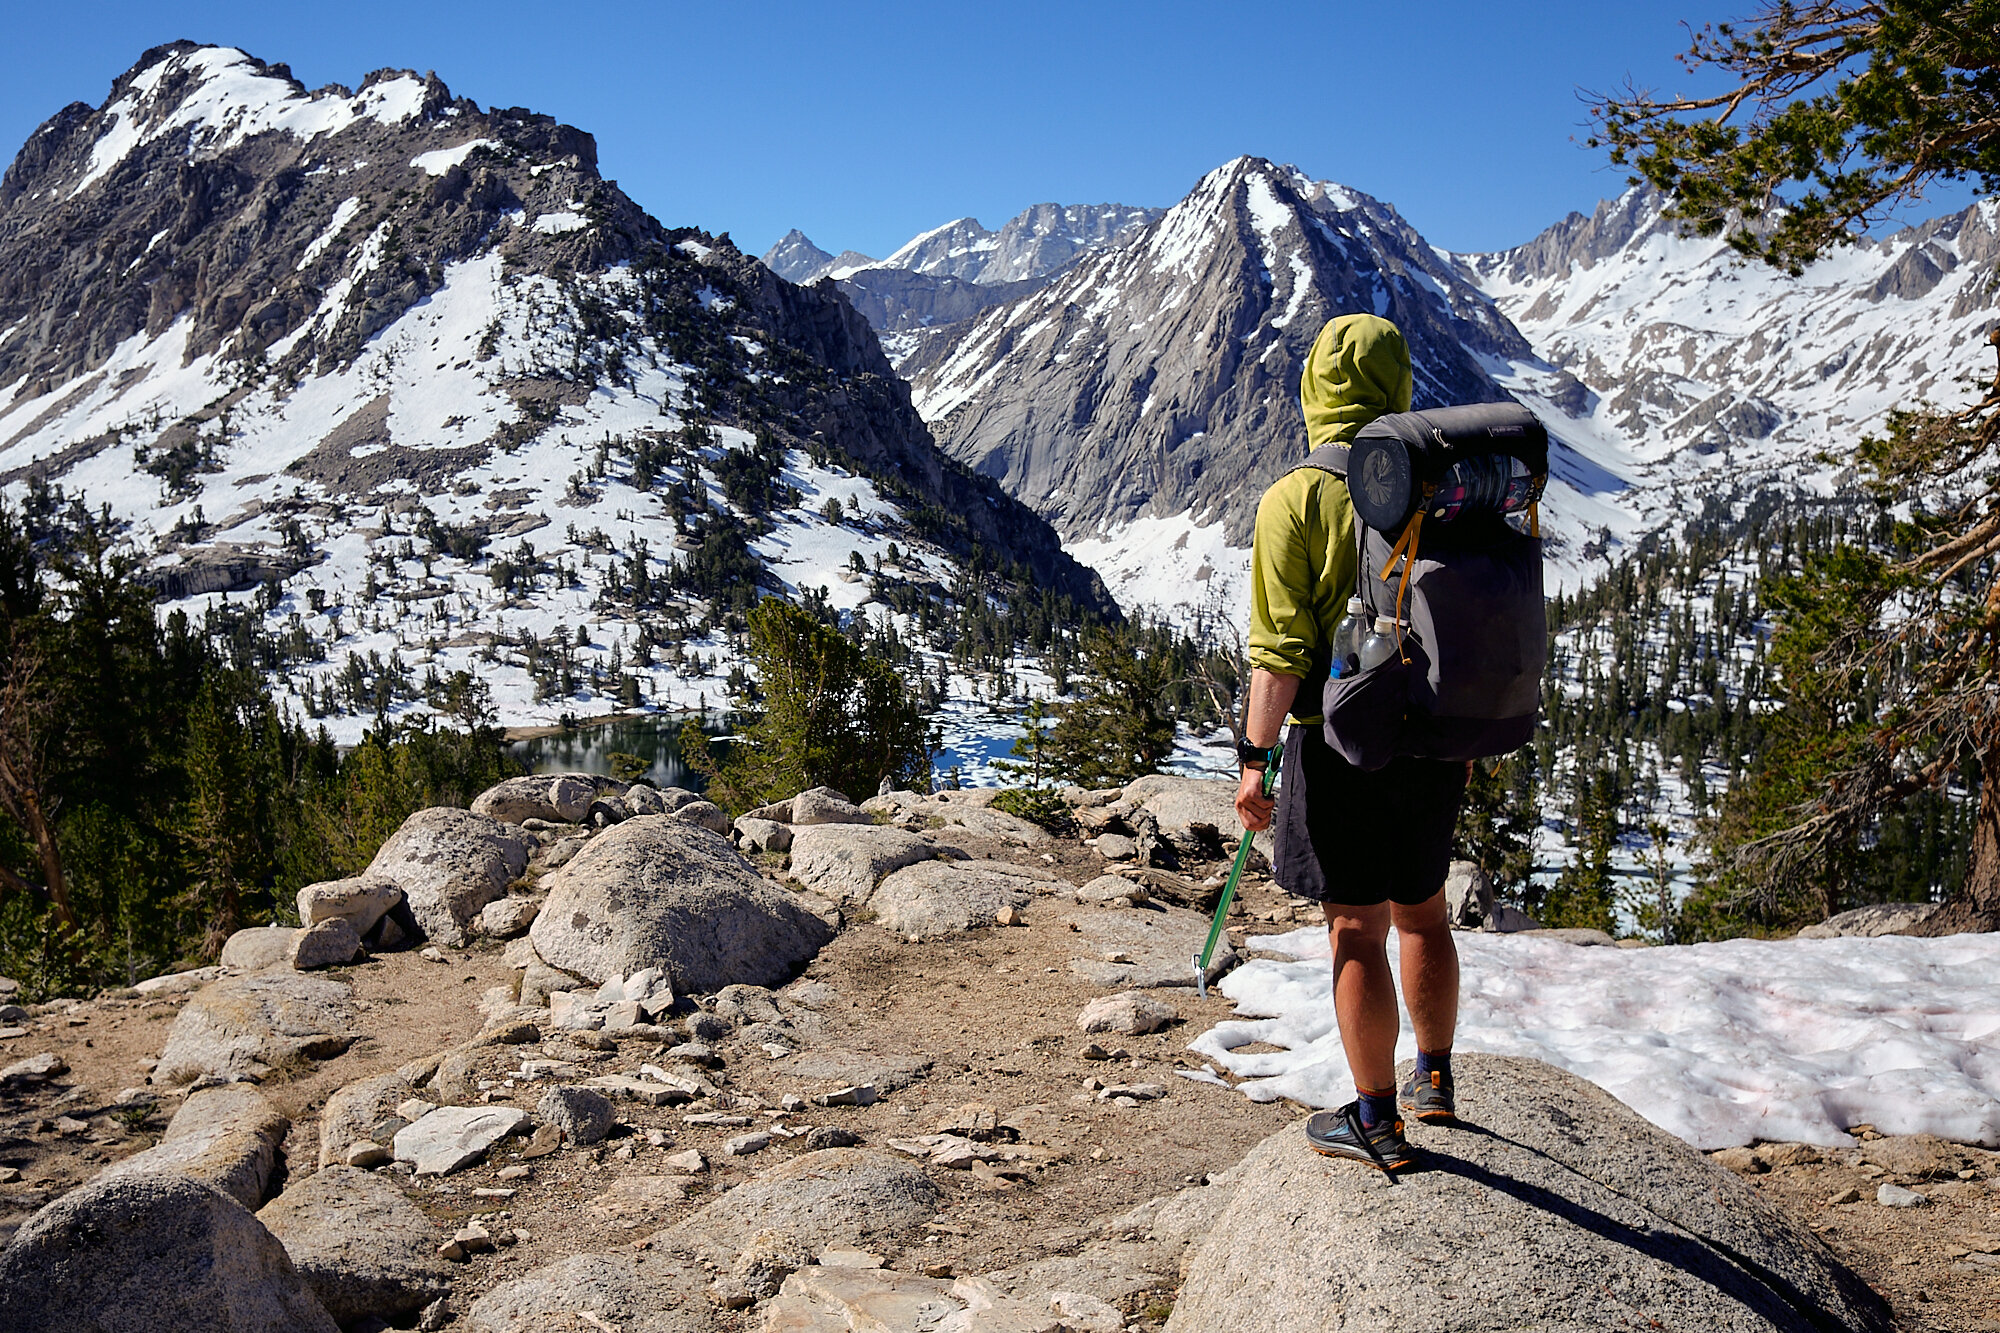  Blankie gazes at the majesty of the unseasonably snowy Sierra Nevada from the approach to Kearsarge Pass. | 6/28/19 Mile 788.9, 11,070' 